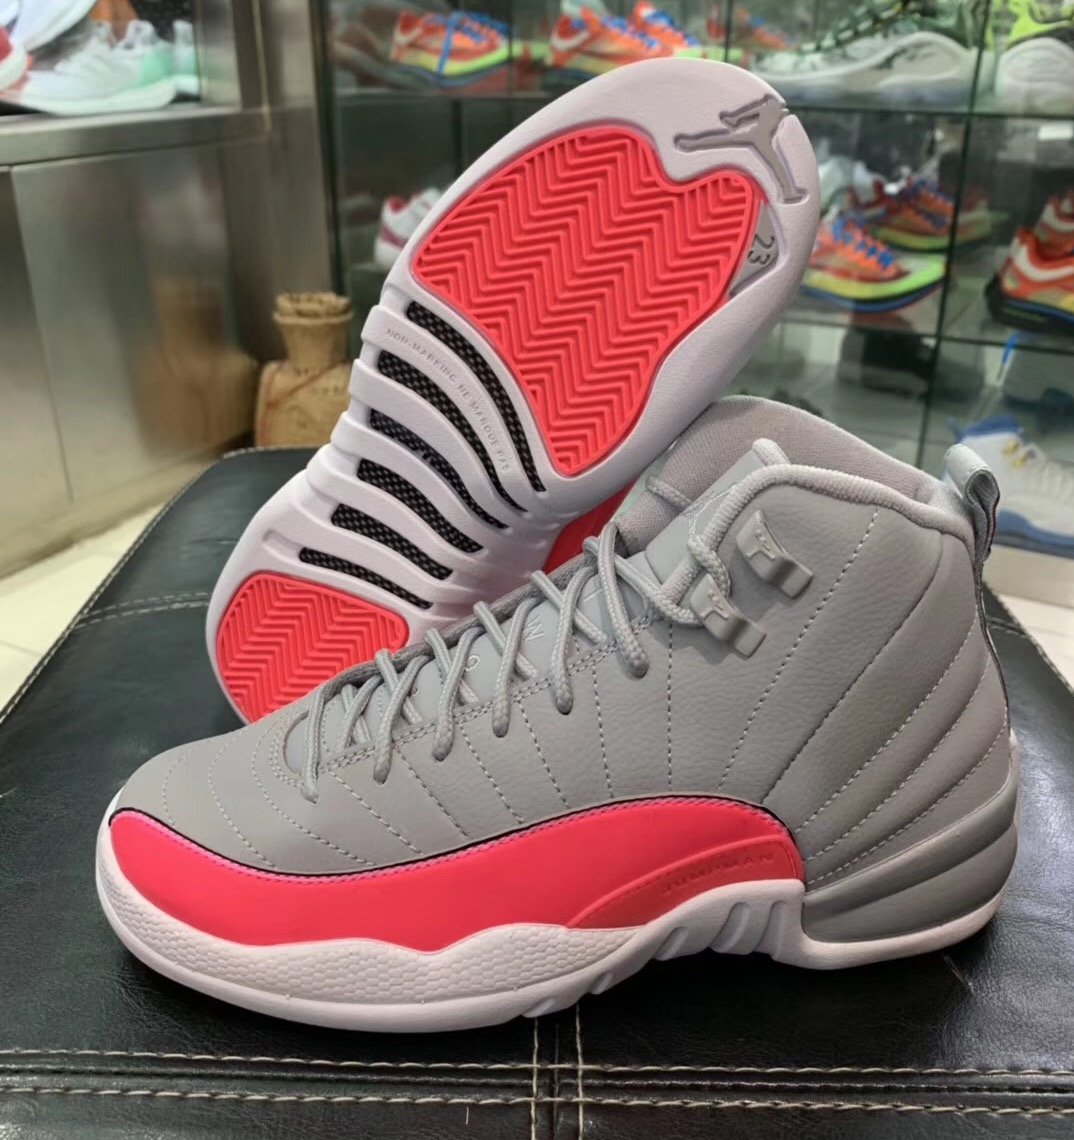 pink and grey 12s 2019